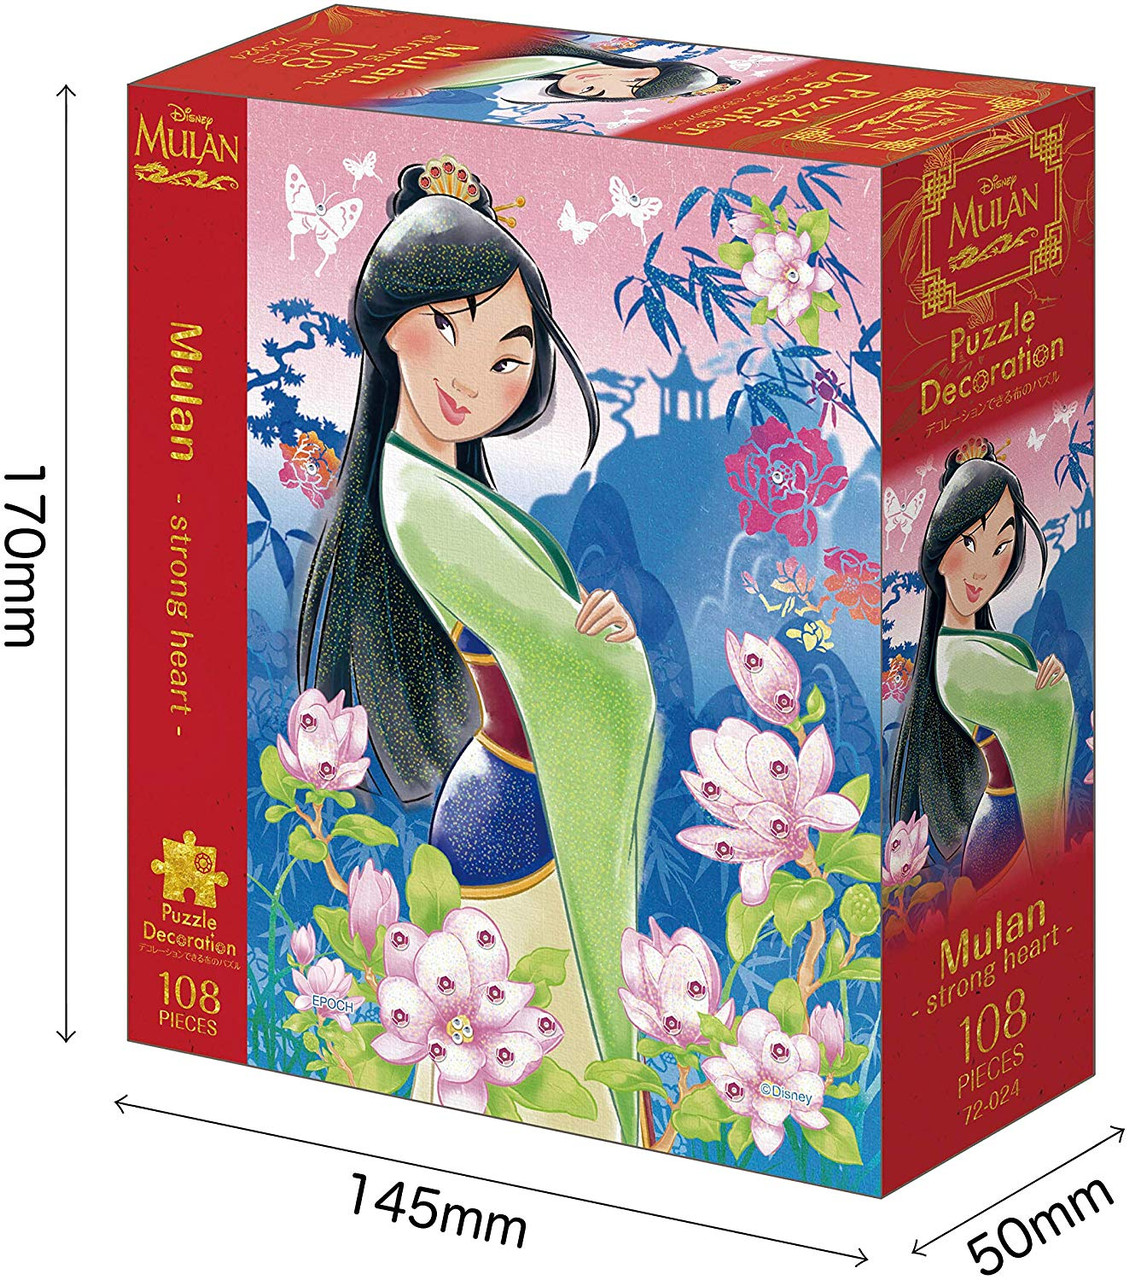 Tenyo 108 Piece Jigsaw Puzzle Mulan Flower Fragrance (18.2x25.7cm) White -  Discovery Japan Mall